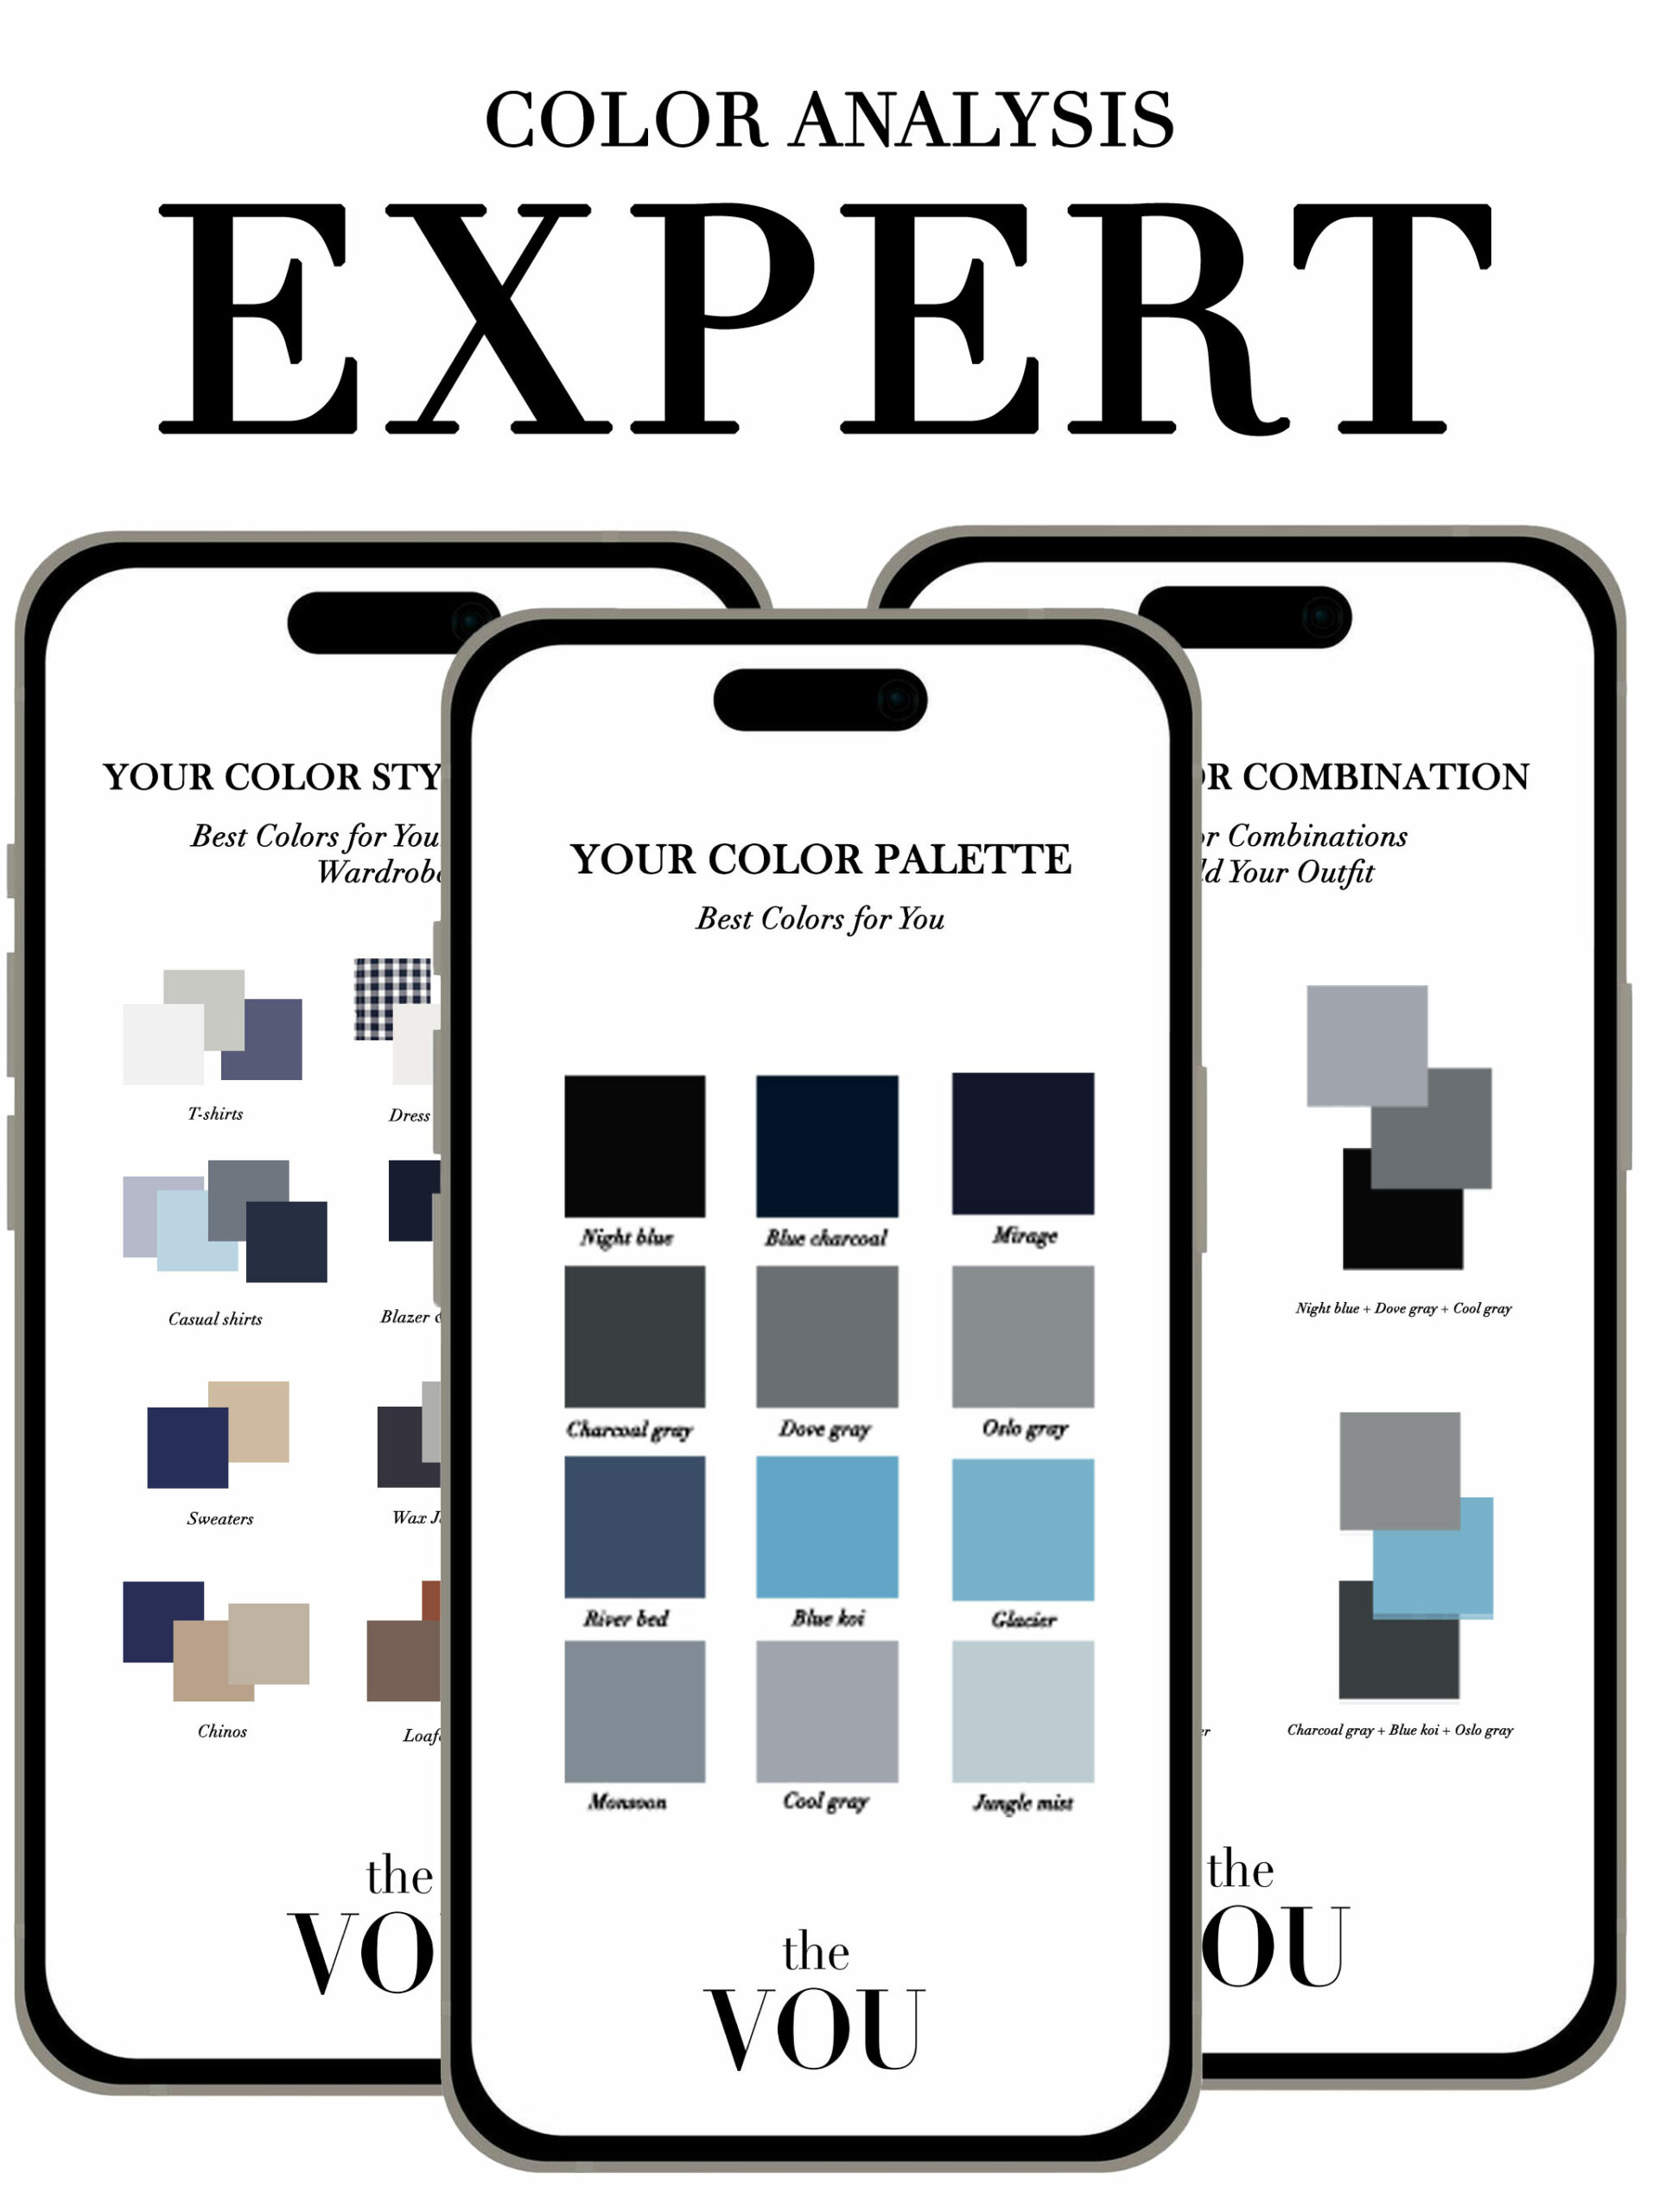 Expert Color Analysis for Men